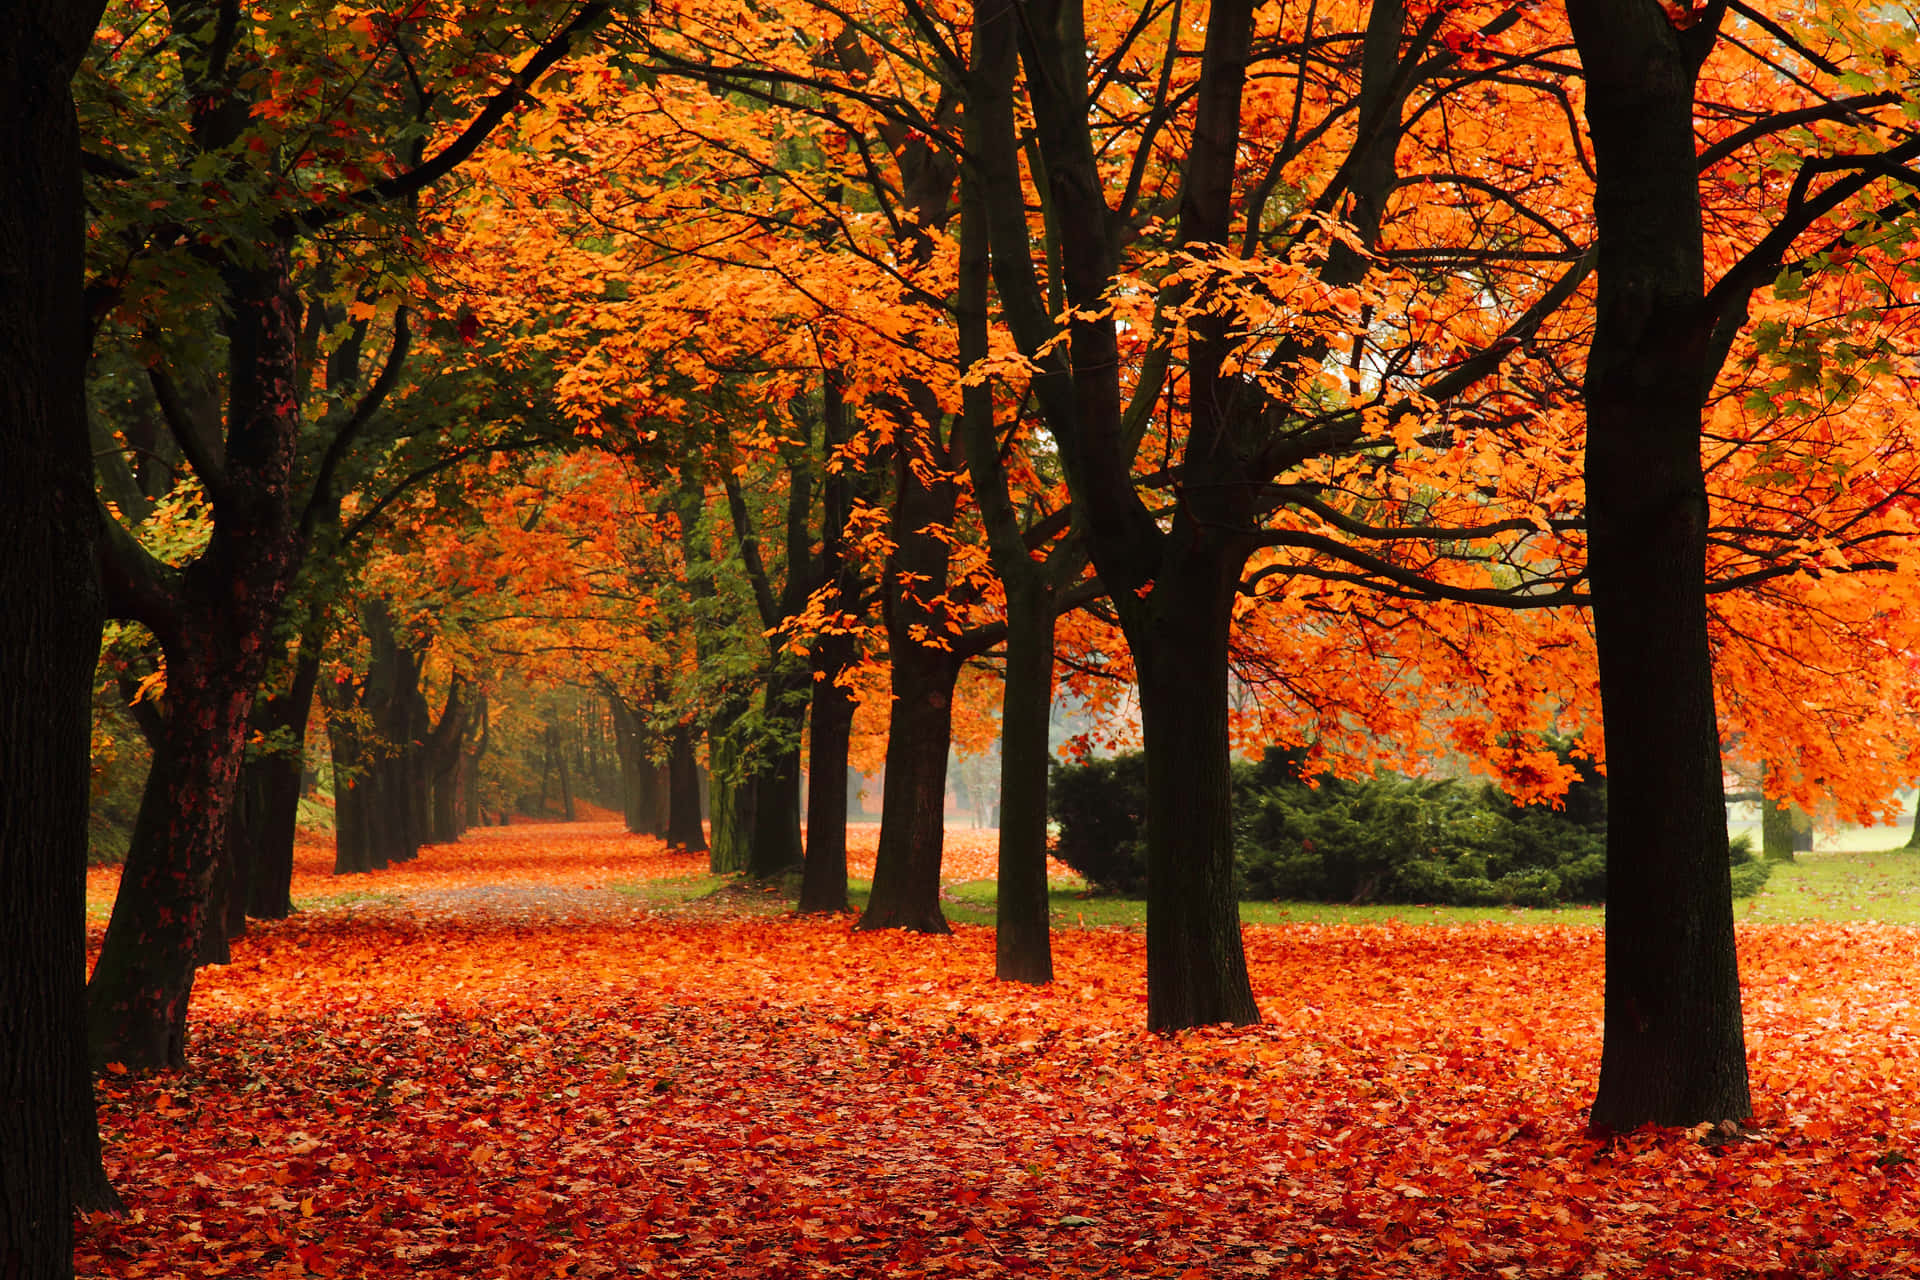 See the beauty of fall in this stunning photograph